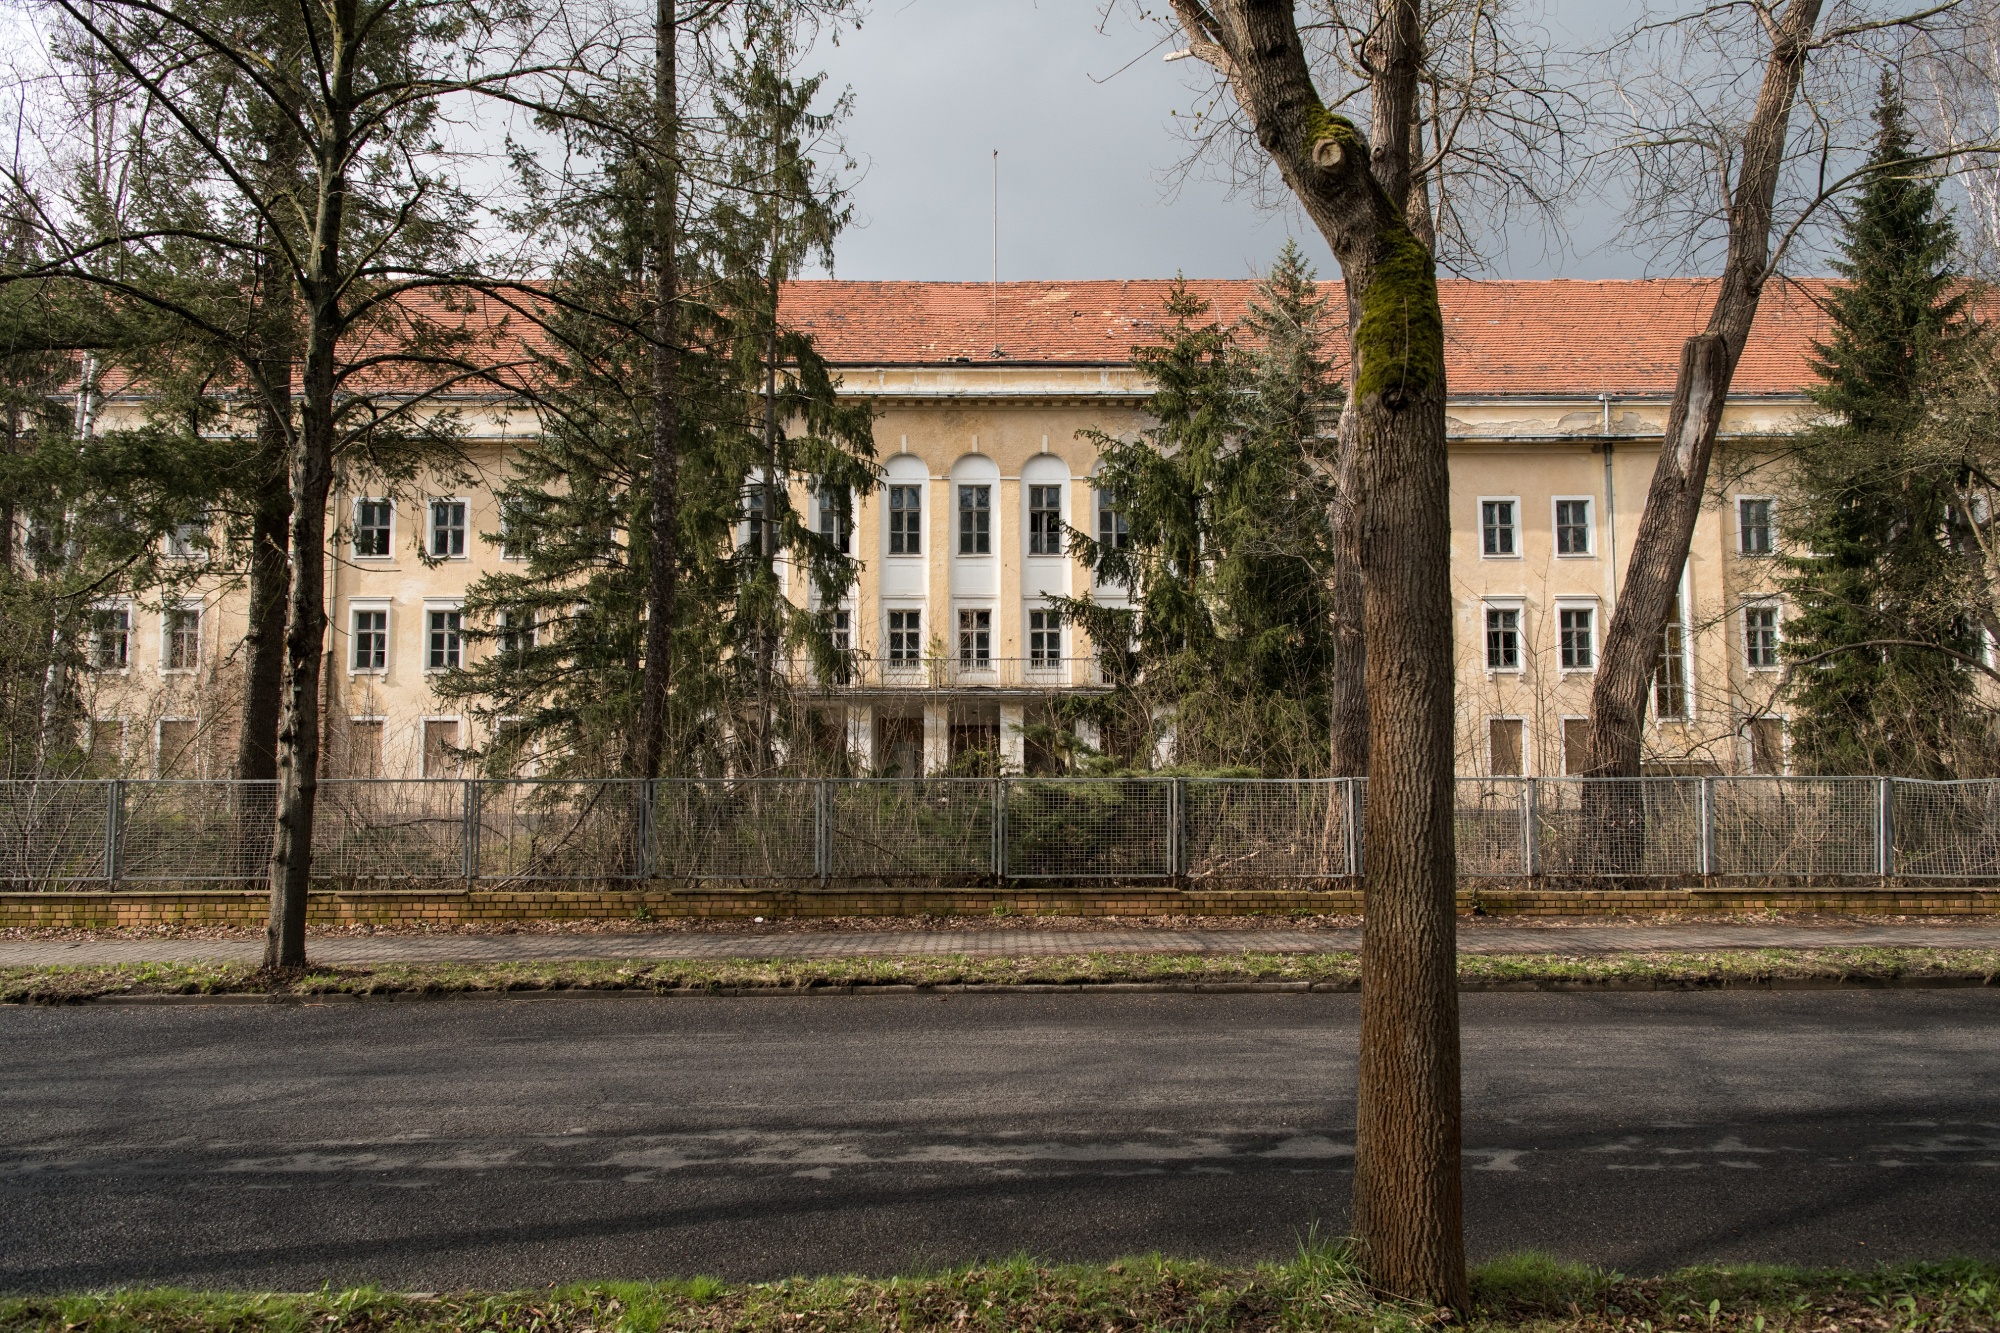 The vacant building of the former headquarters of the Soviet armed forces, the so called &quot;White House&quot; in&nbsp;Zossen, near Berlin, was&nbsp;pitched to South Korean investors as a luxury property redevelopment opportunity.&nbsp;